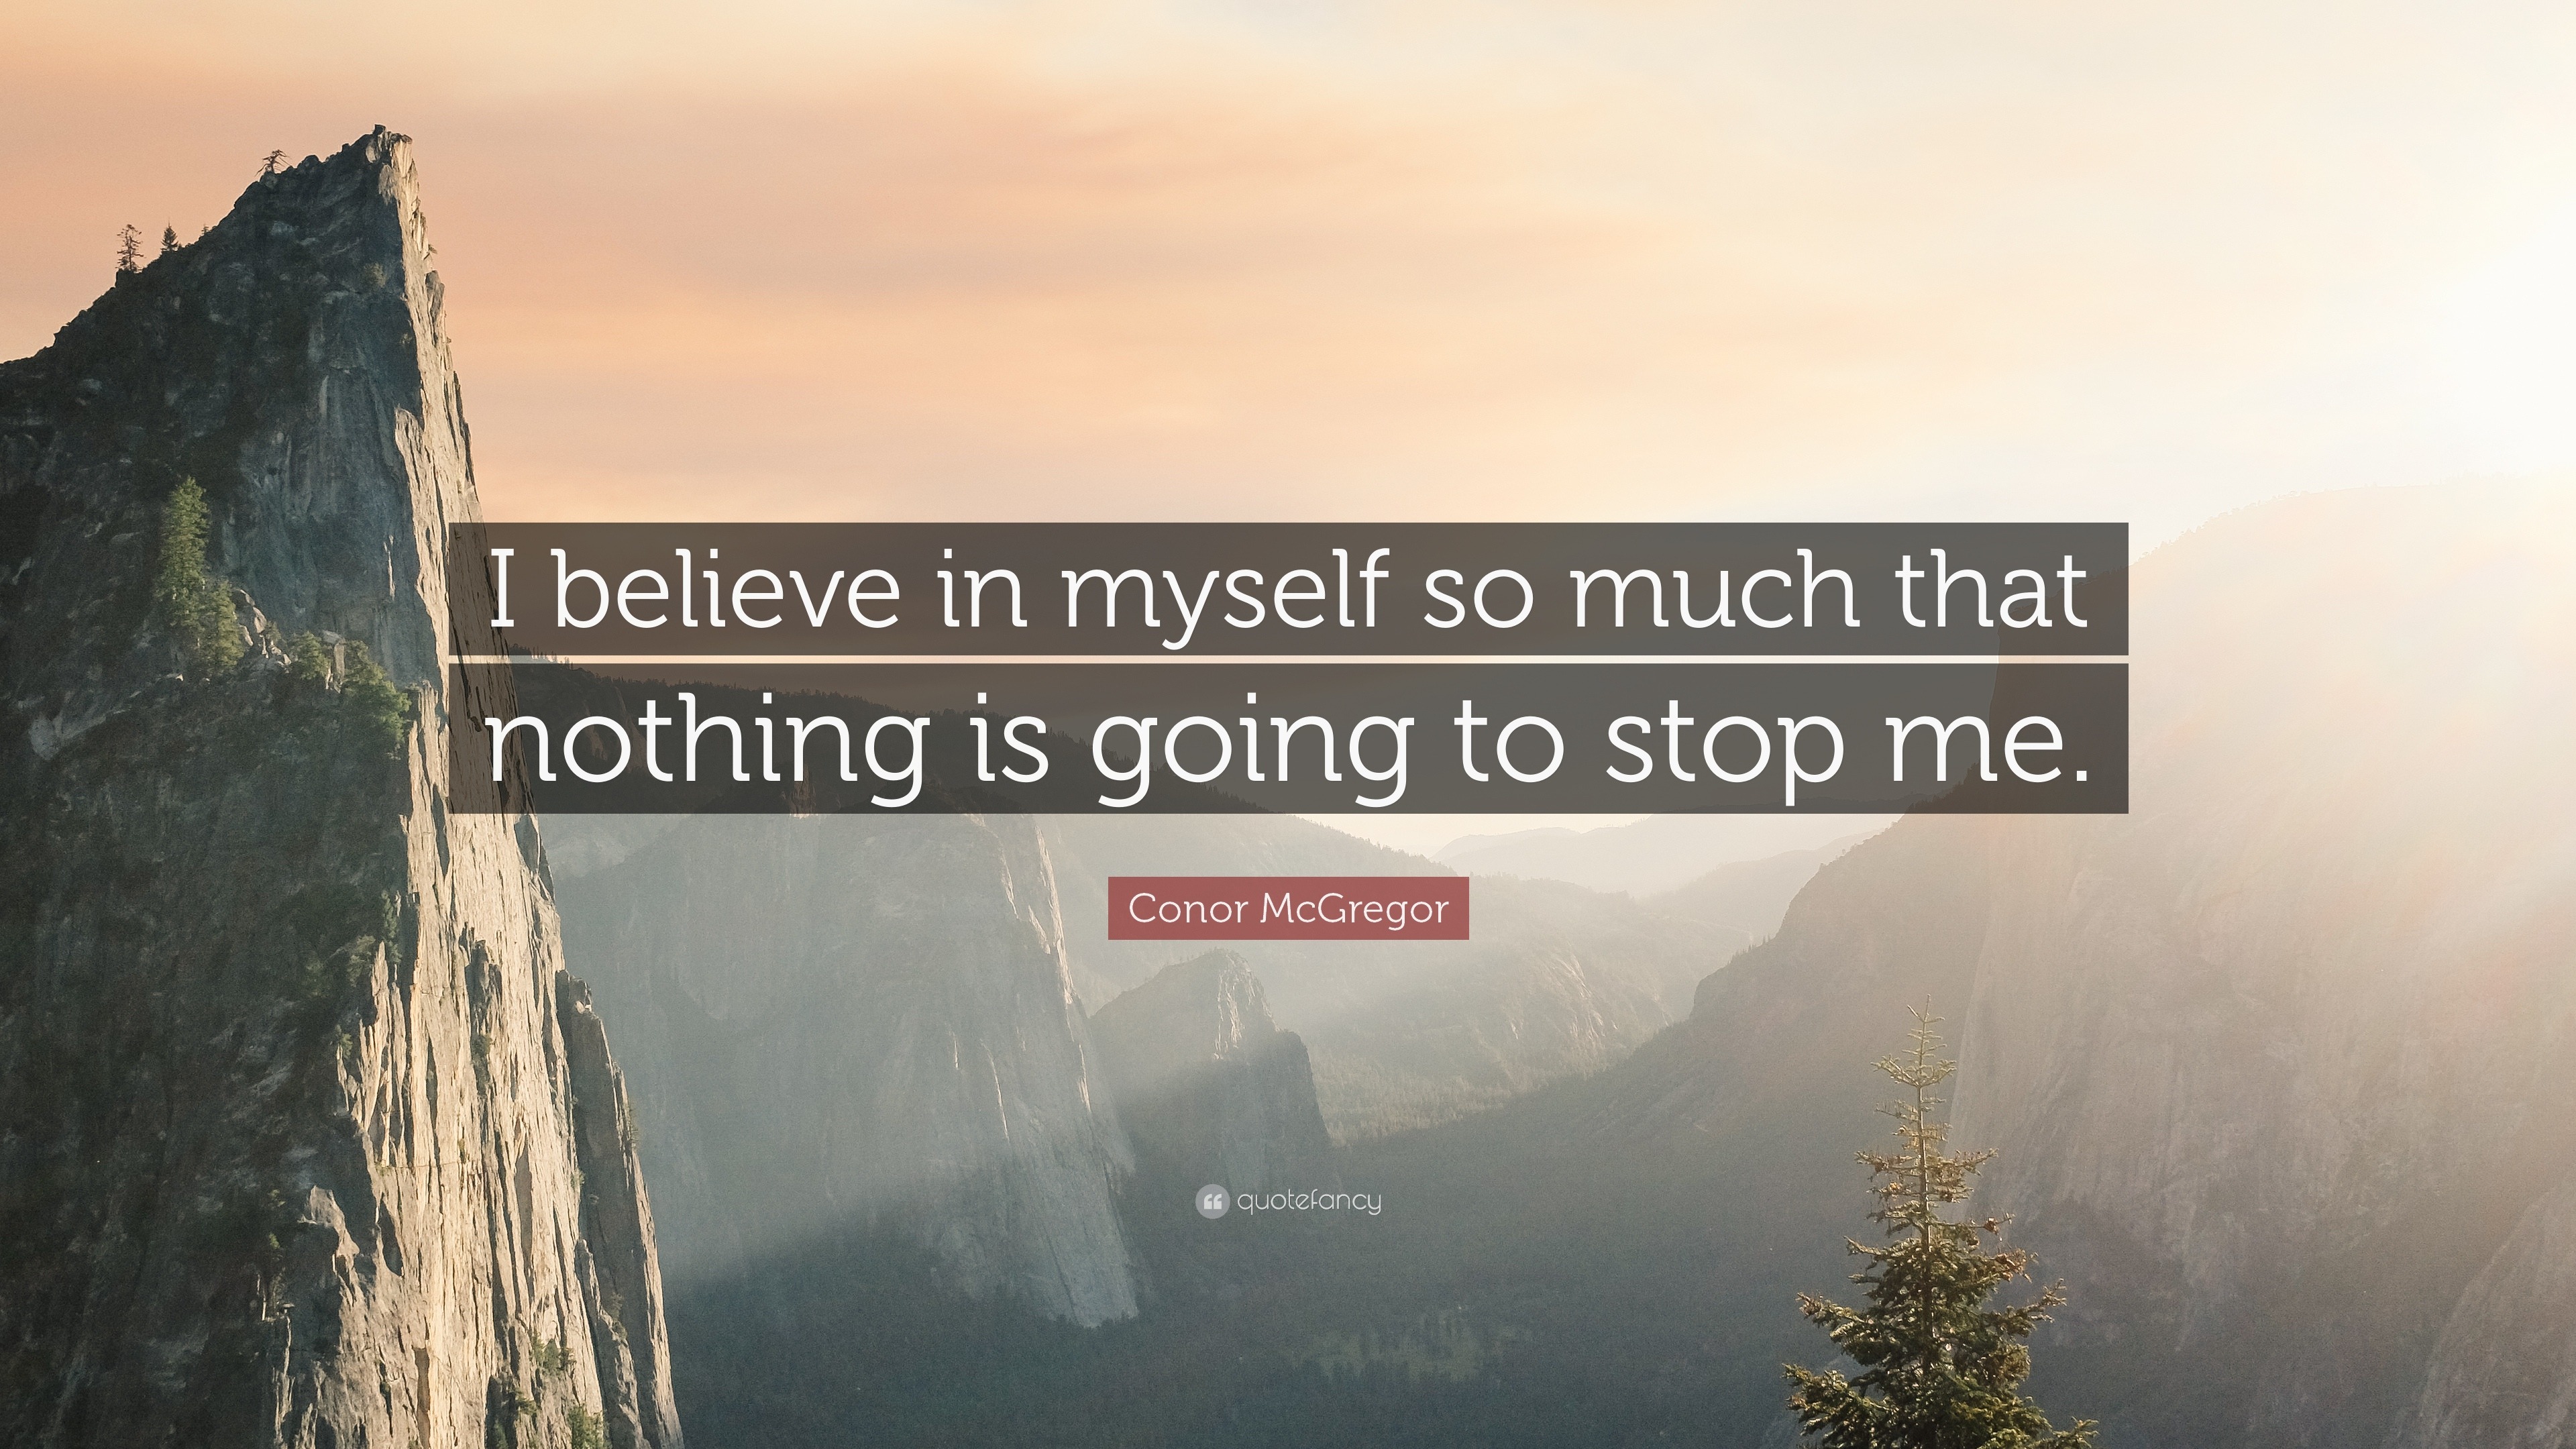 Conor Mcgregor Quote I Believe In Myself So Much That Nothing Is Going To Stop Me 22 Wallpapers Quotefancy